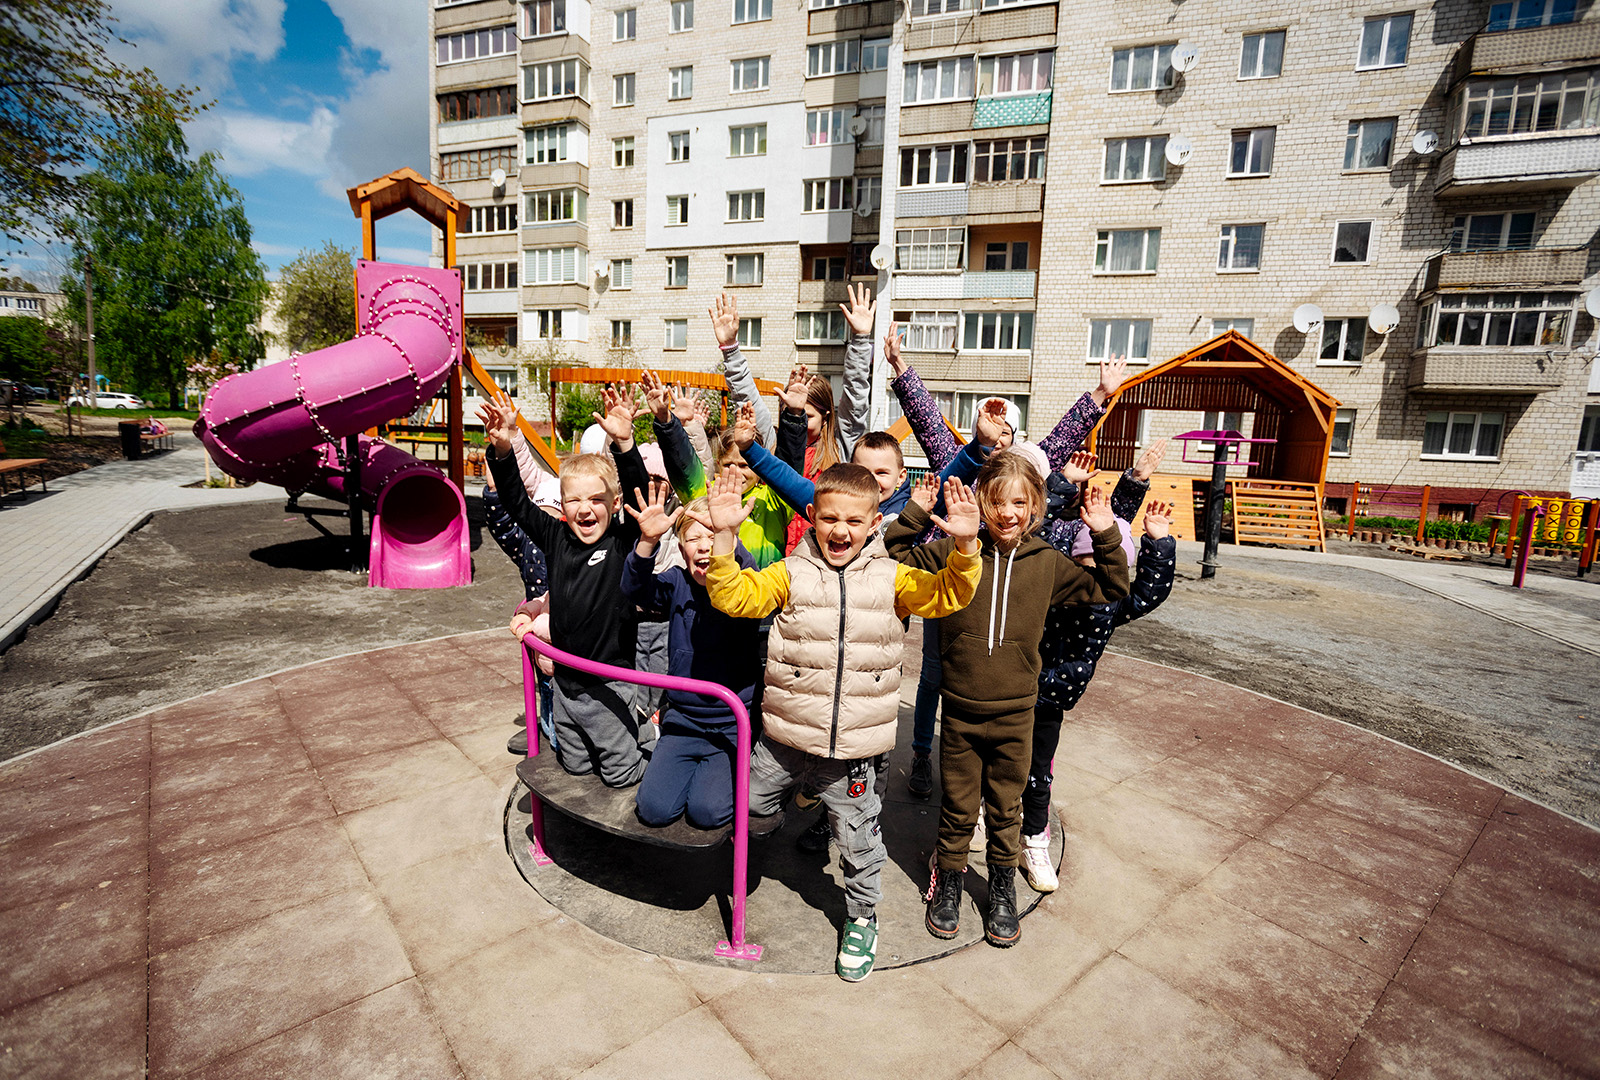 A group of about a dozen children pose on a playground roundabout for a photo in the Ukrainian town of Stebnyk.